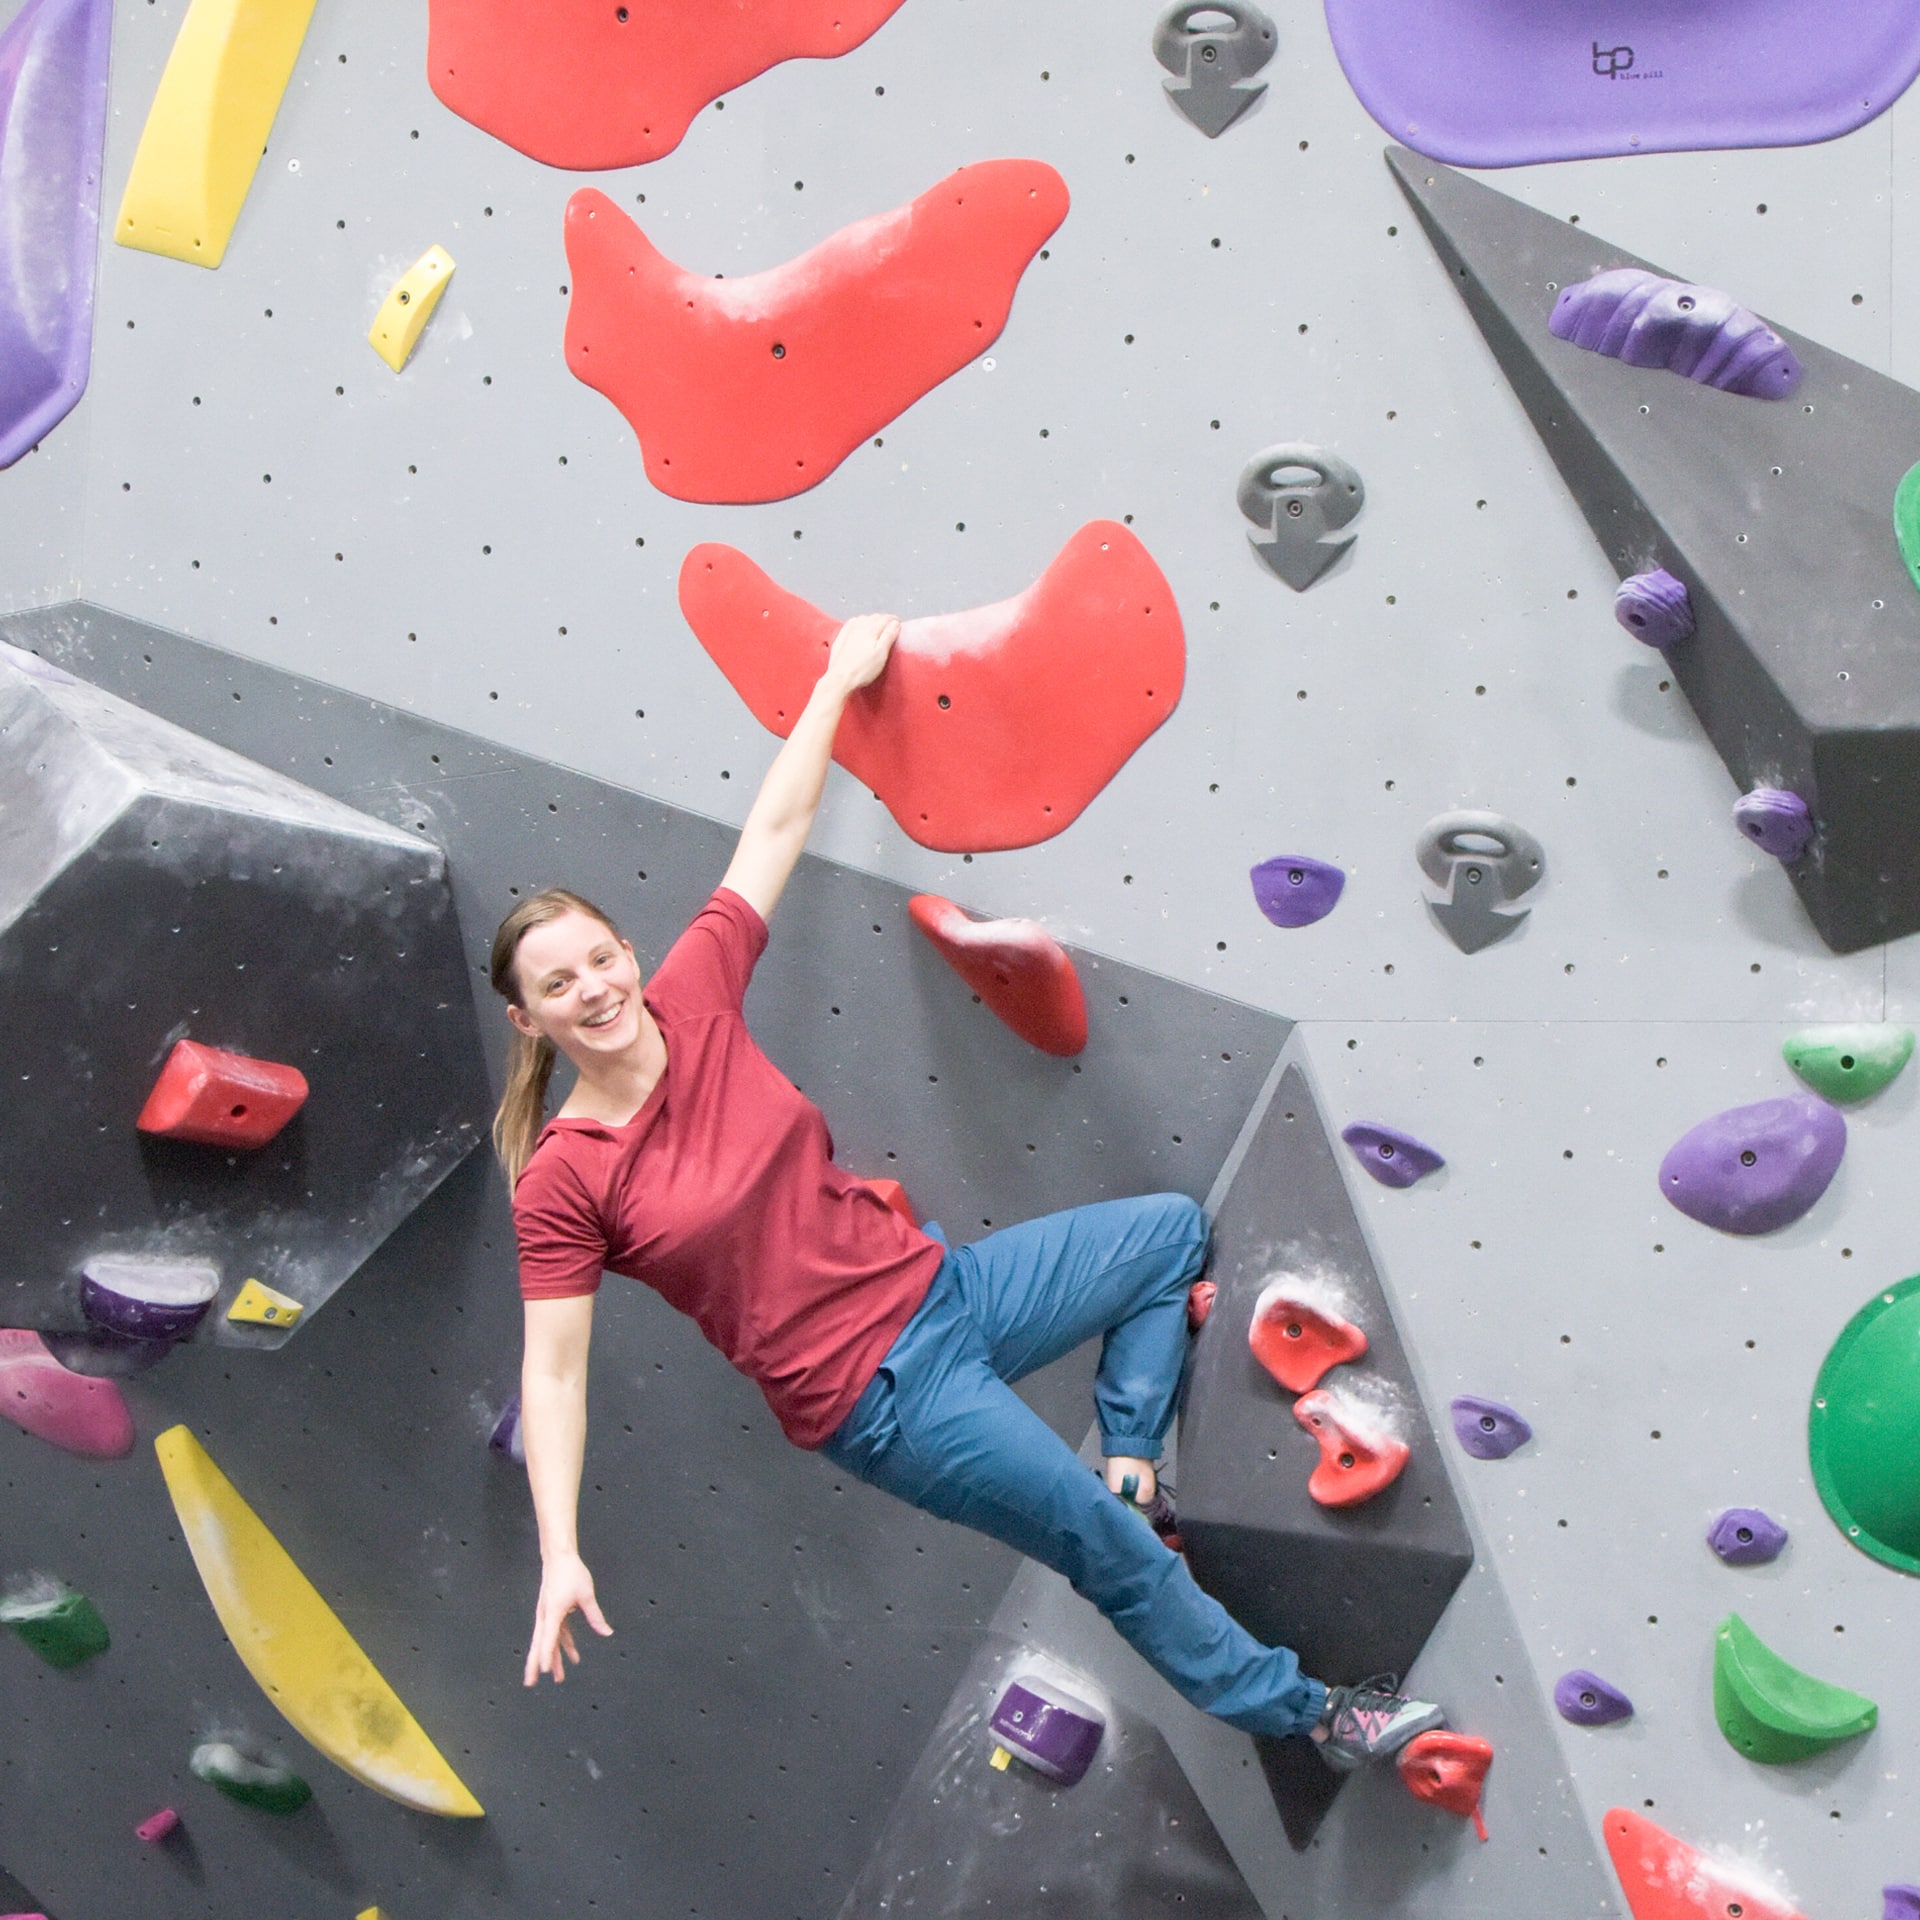 Is Bouldering For Me?